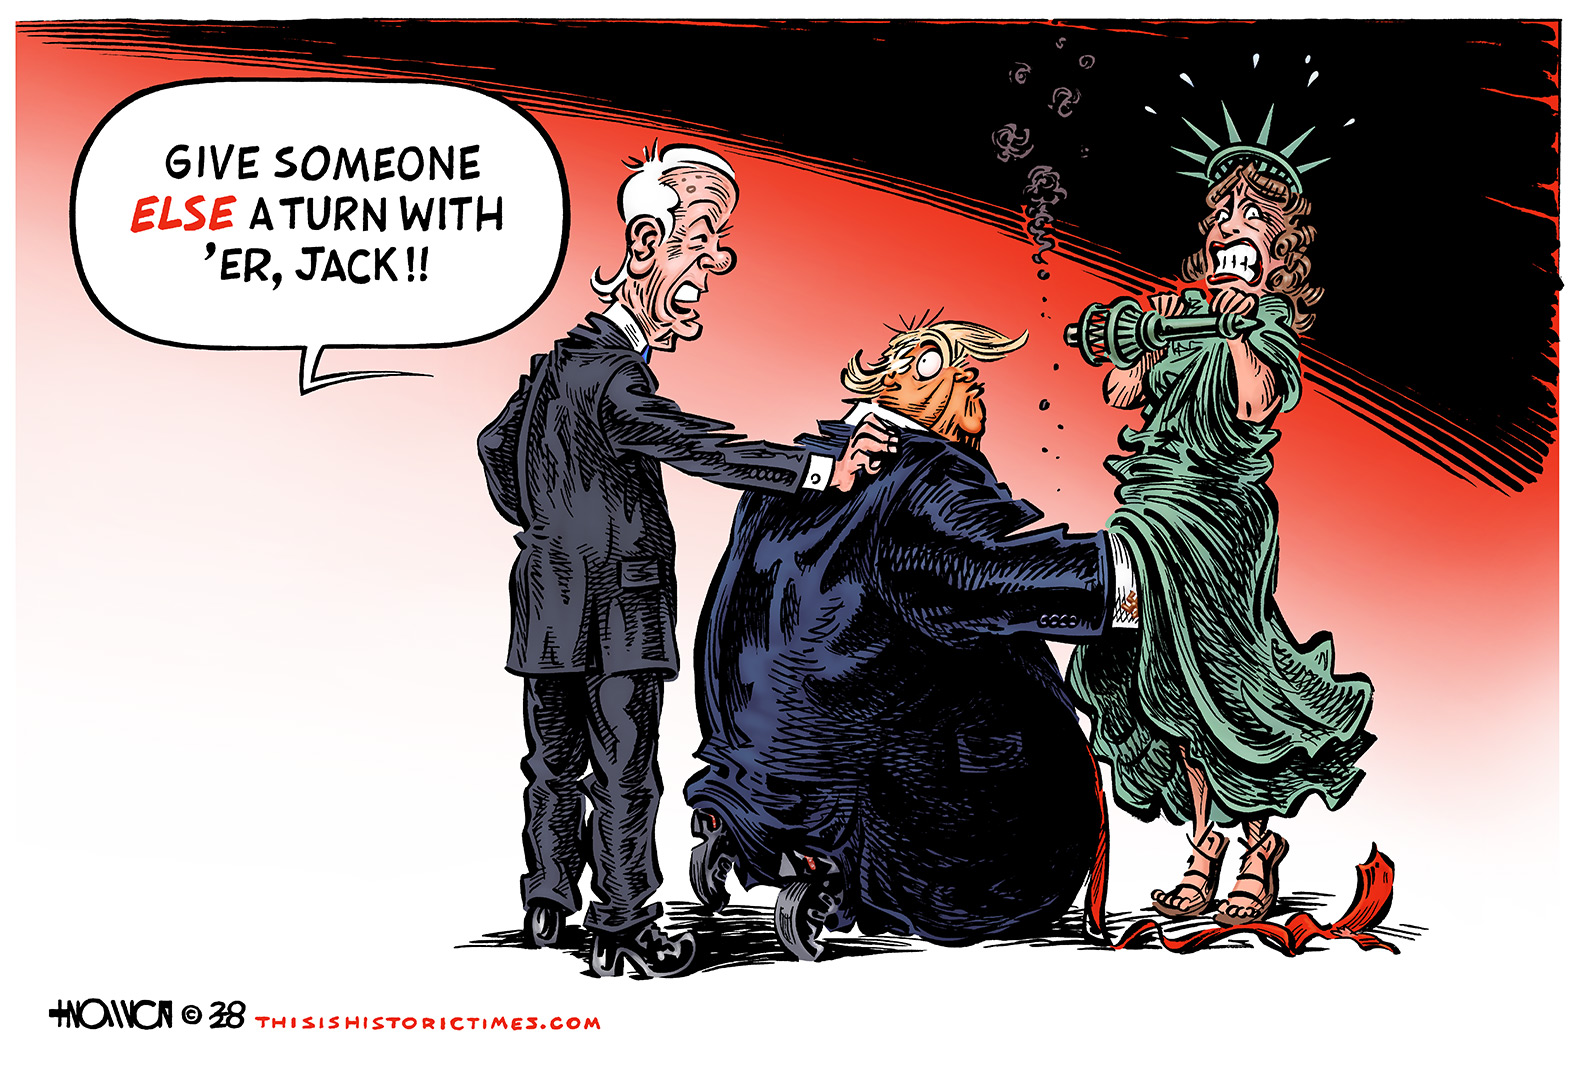 Donald Trump grabs Lady Liberty by the pussy while Joe Biden tries to do the same.